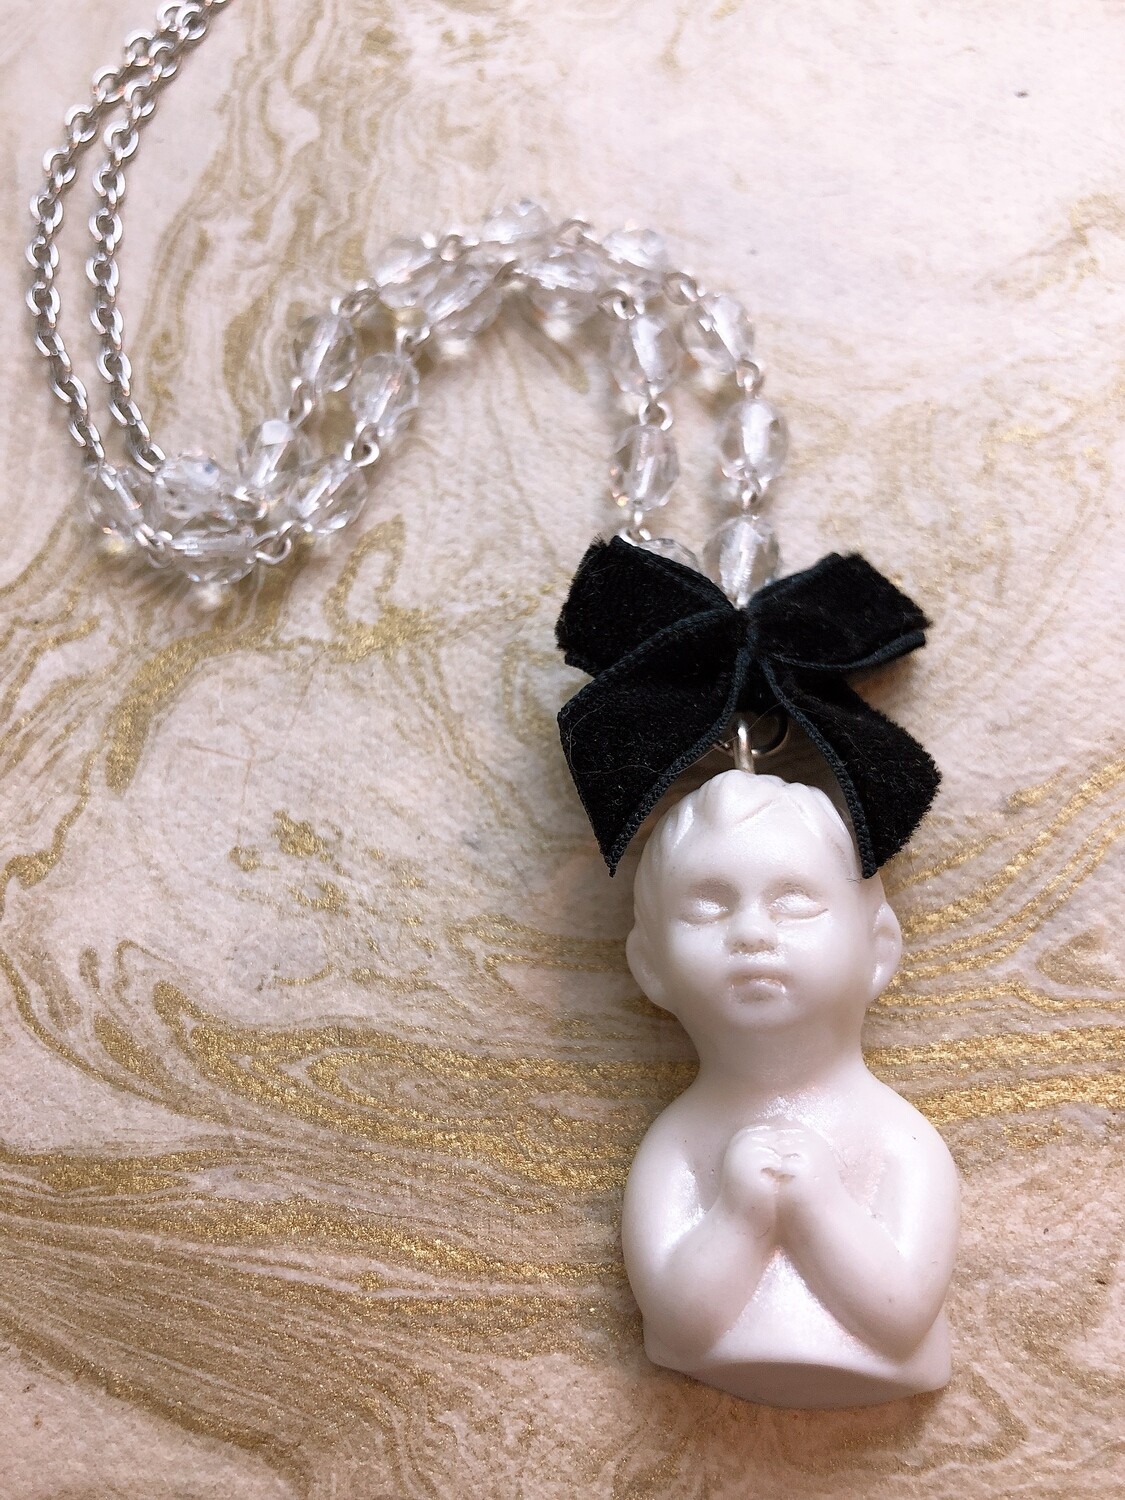 doll parts necklace (praying)